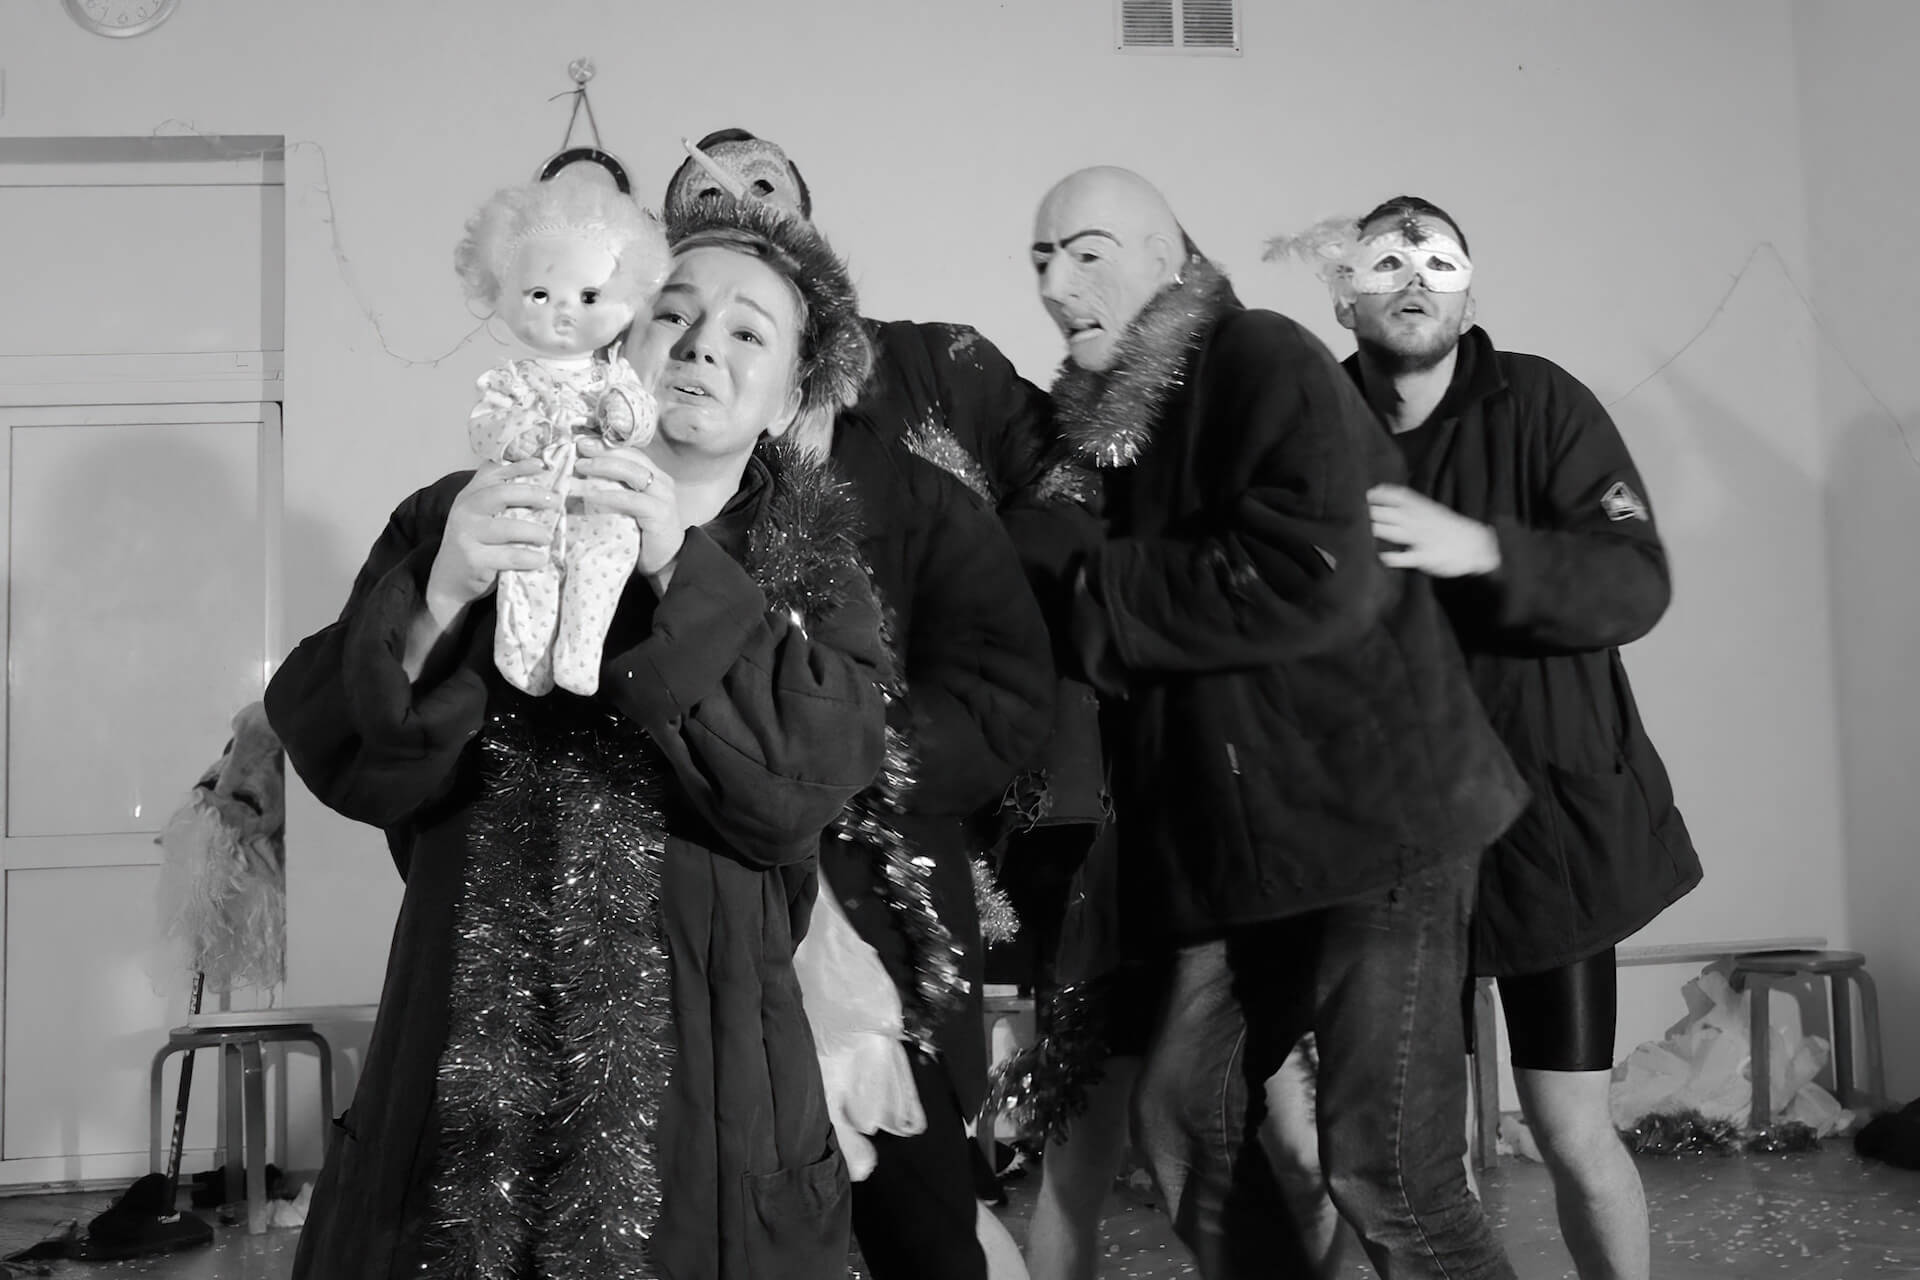 Black and white image of four performers frightened by something and backing up. One other performer is holding up a doll to it with a desperate expression.